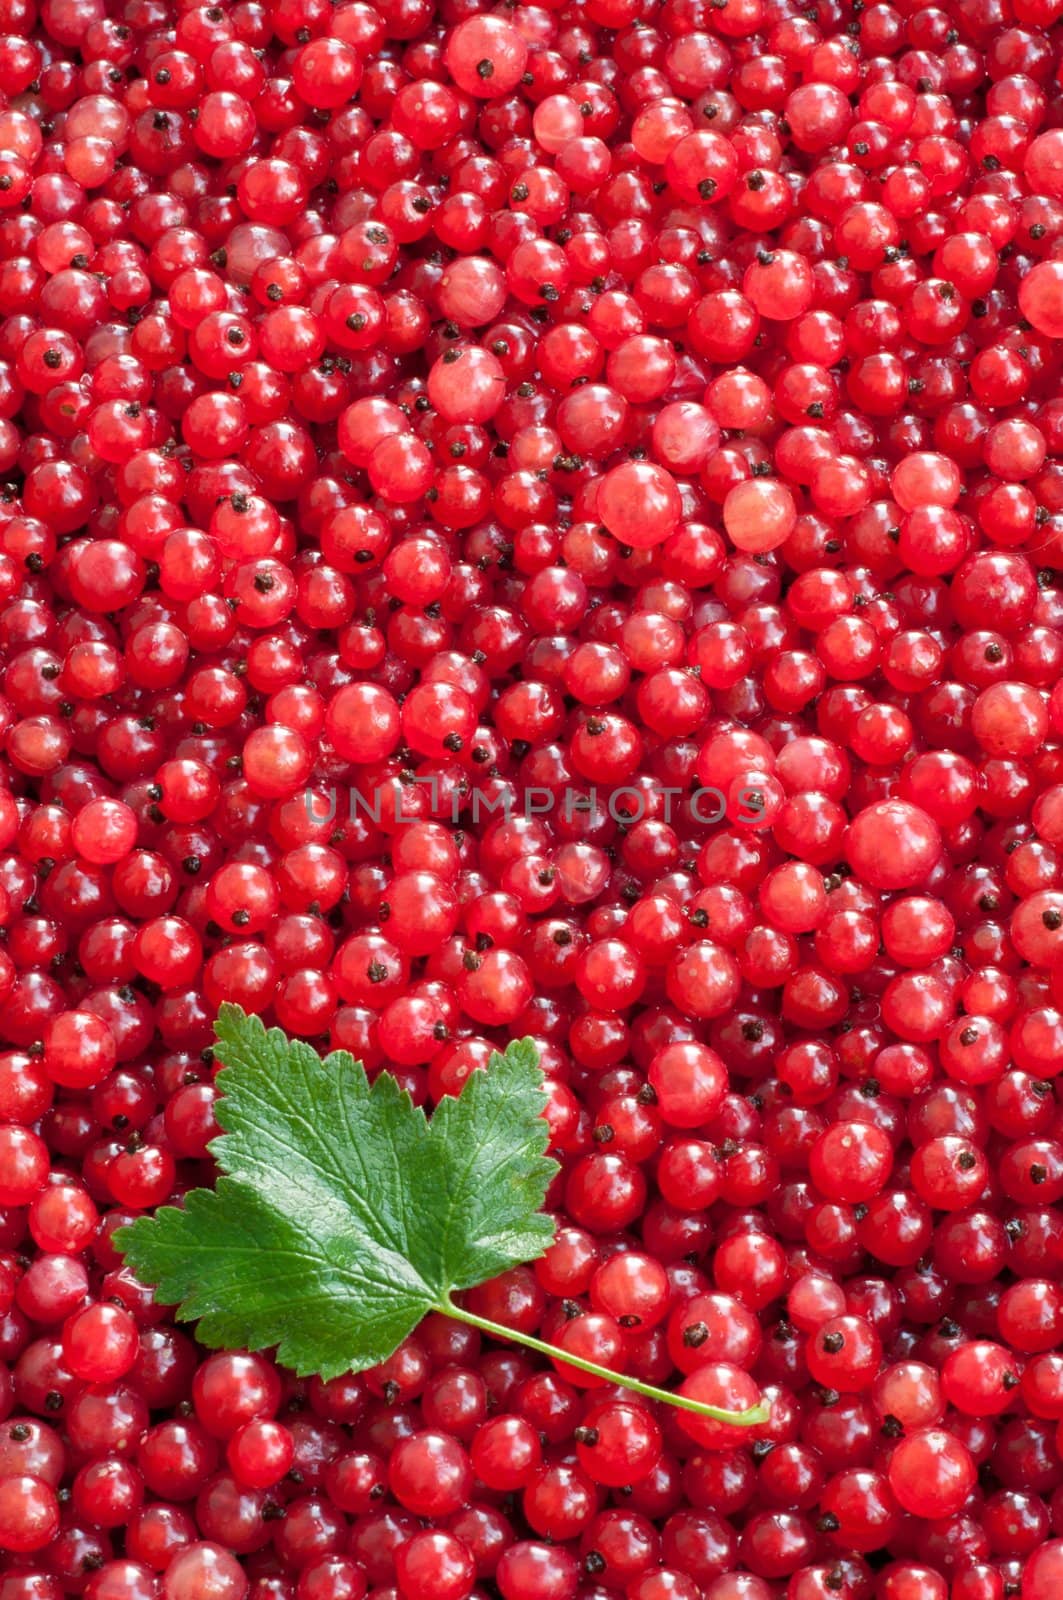 Natural background: berries of a red currant. Summer, July,. Summer, July, the Central Russia